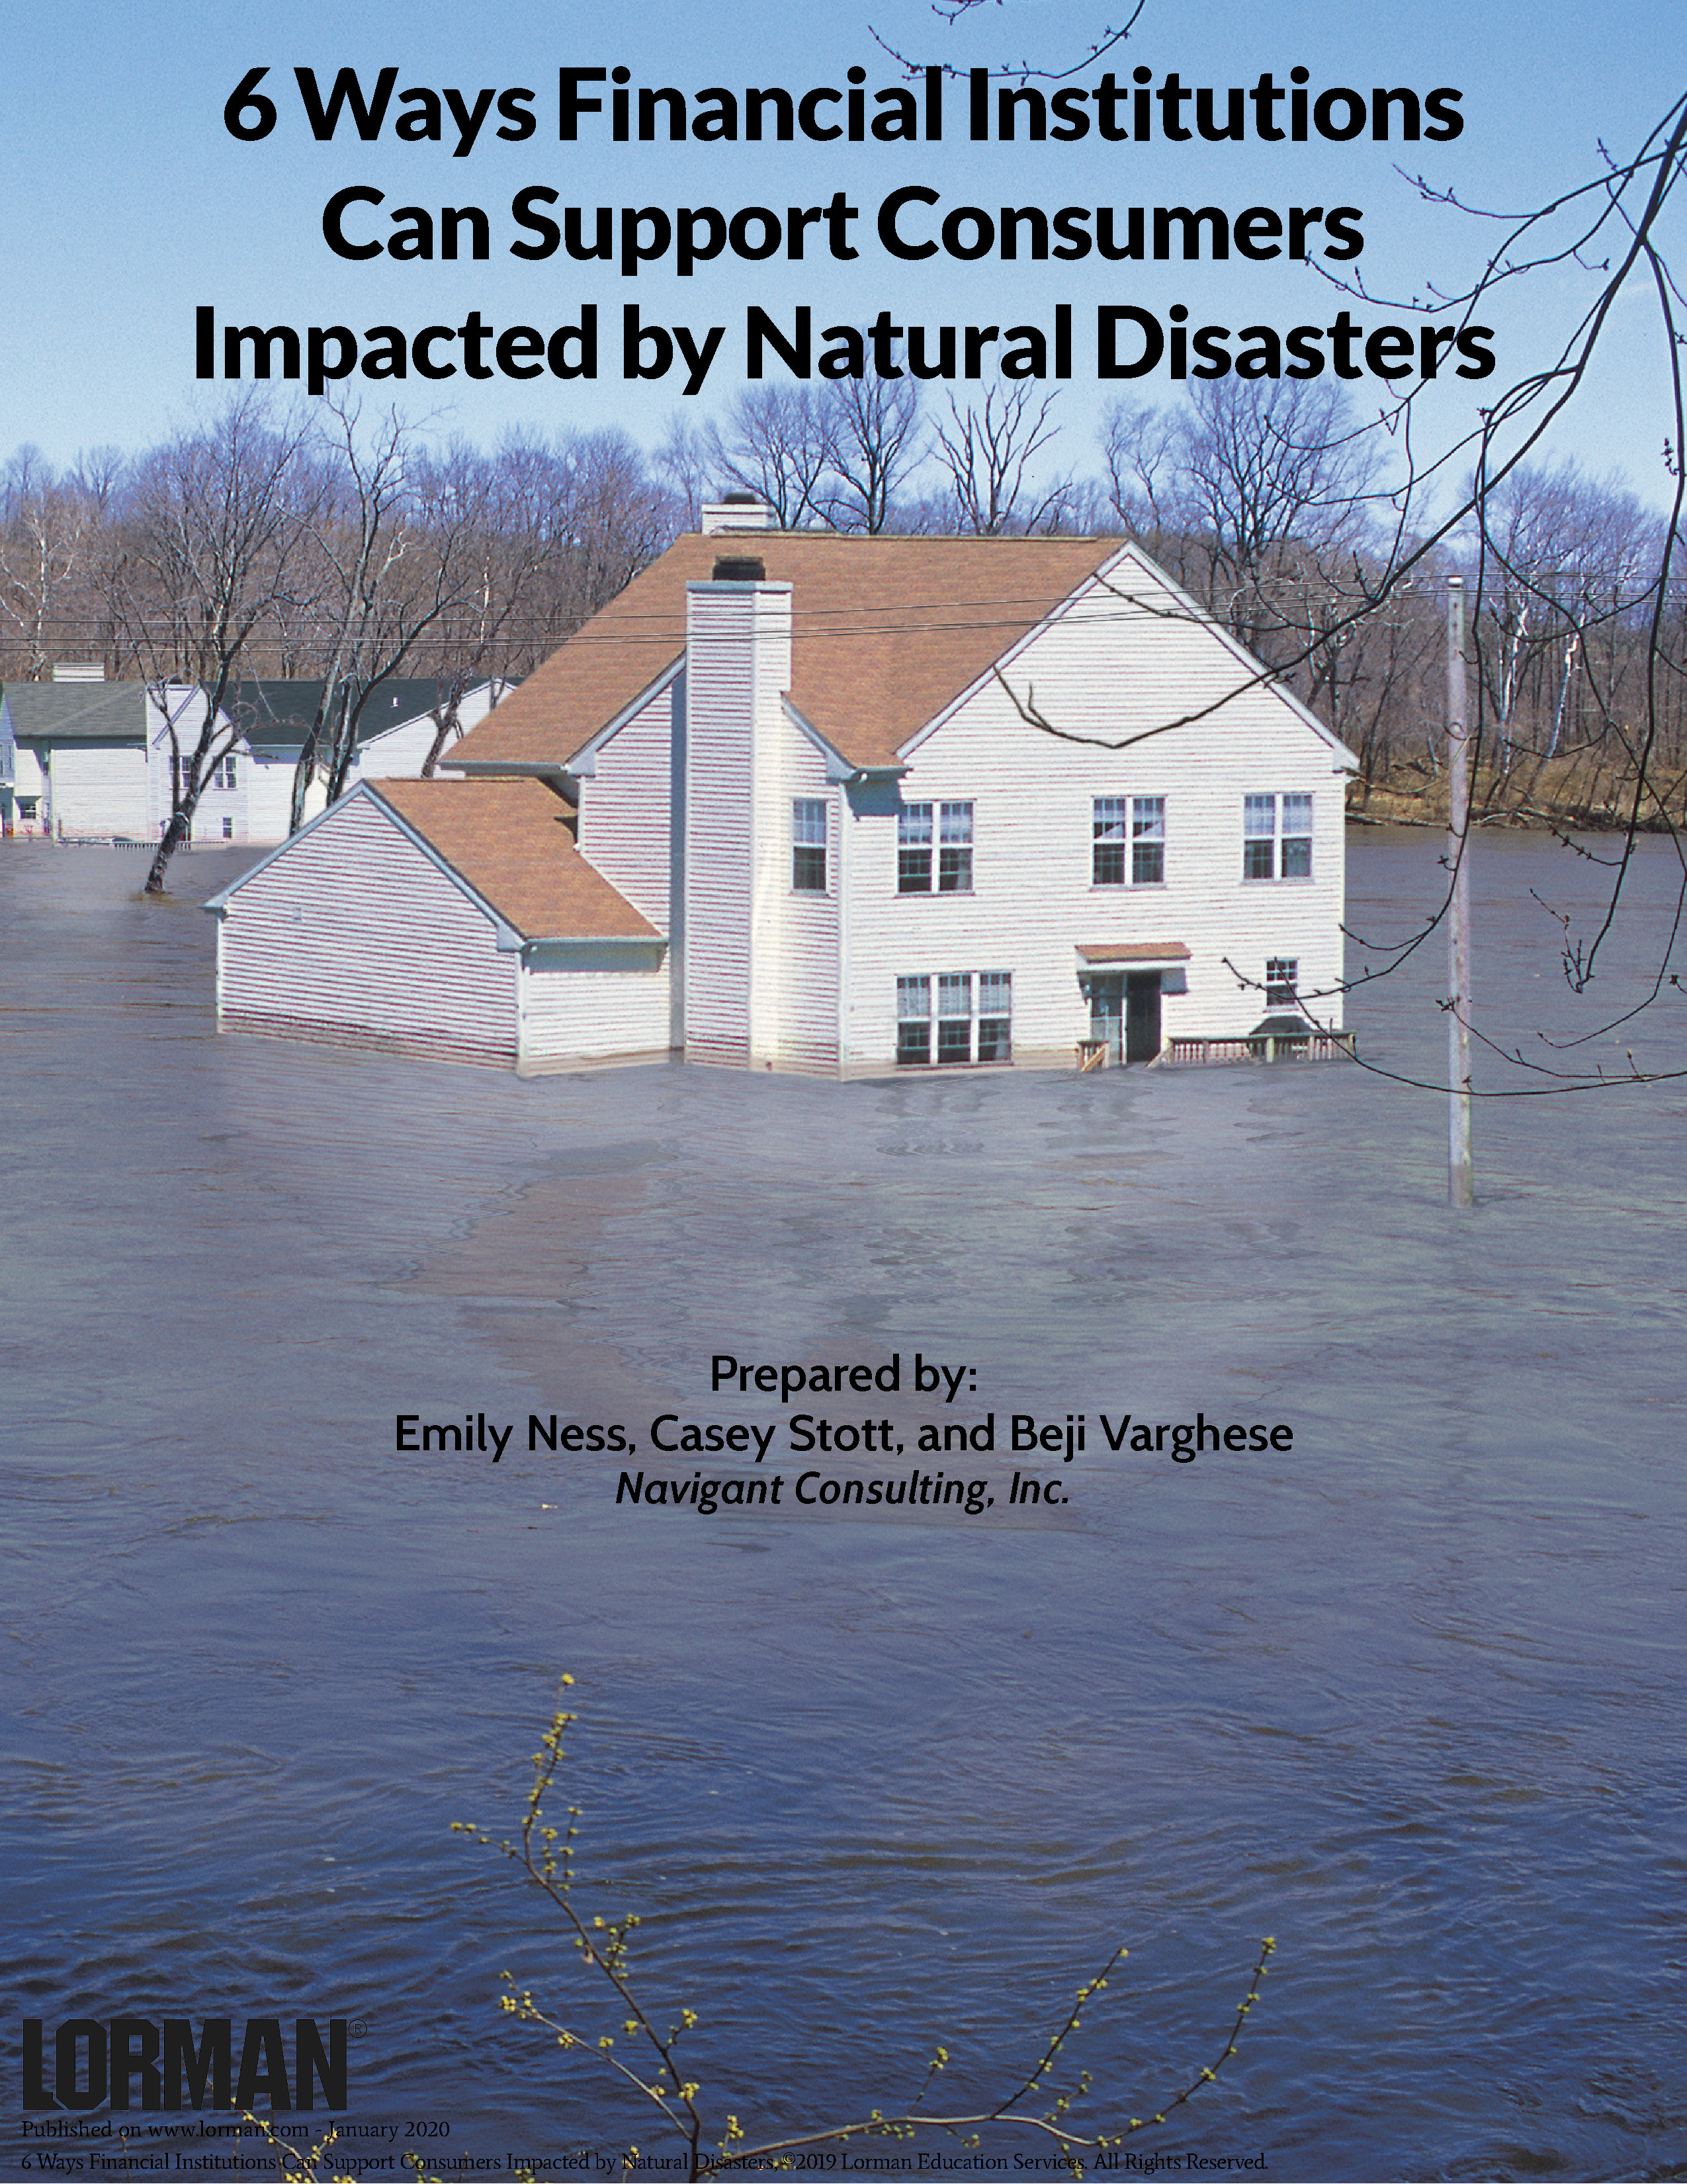 6 Ways Financial Institutions Can Support Consumers Impacted by Natural Disasters